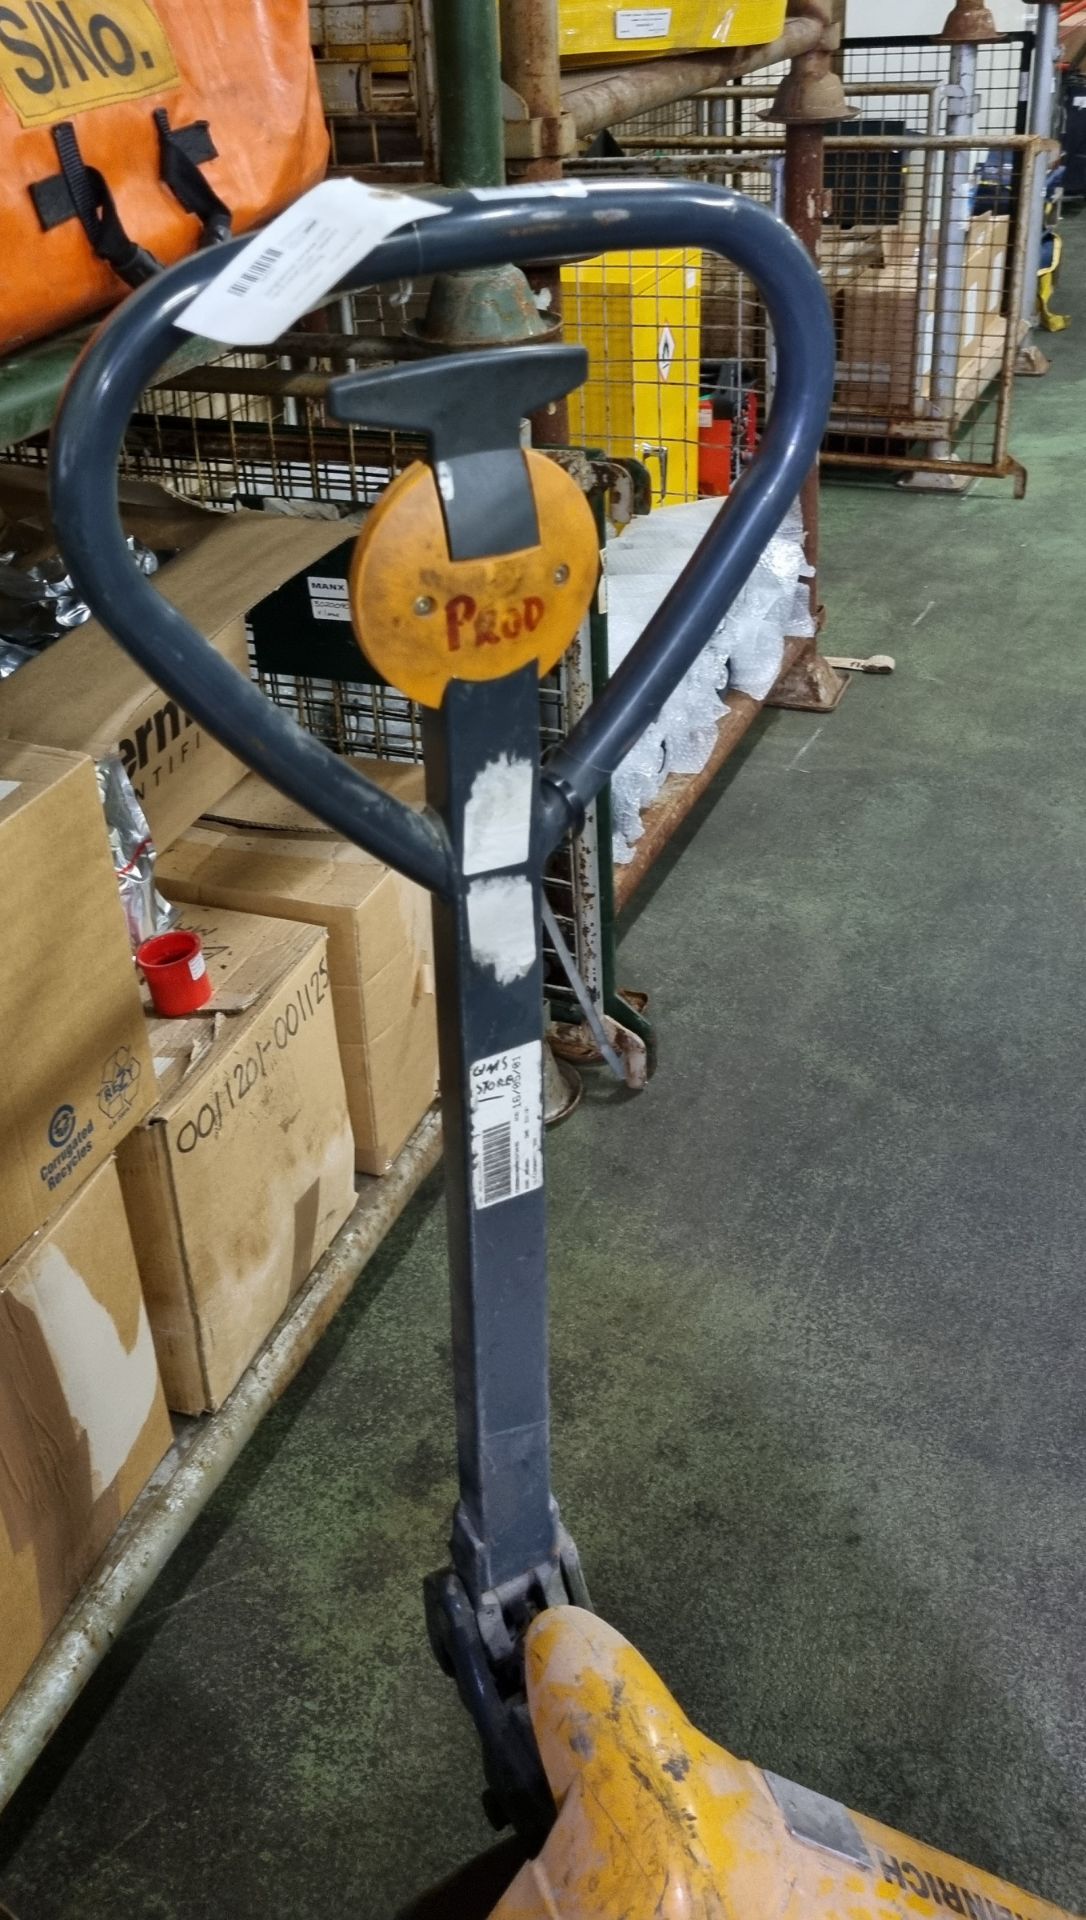 Jungheinrich Ameise 2200 hand pallet truck - capacity: 2200kg - Image 4 of 4